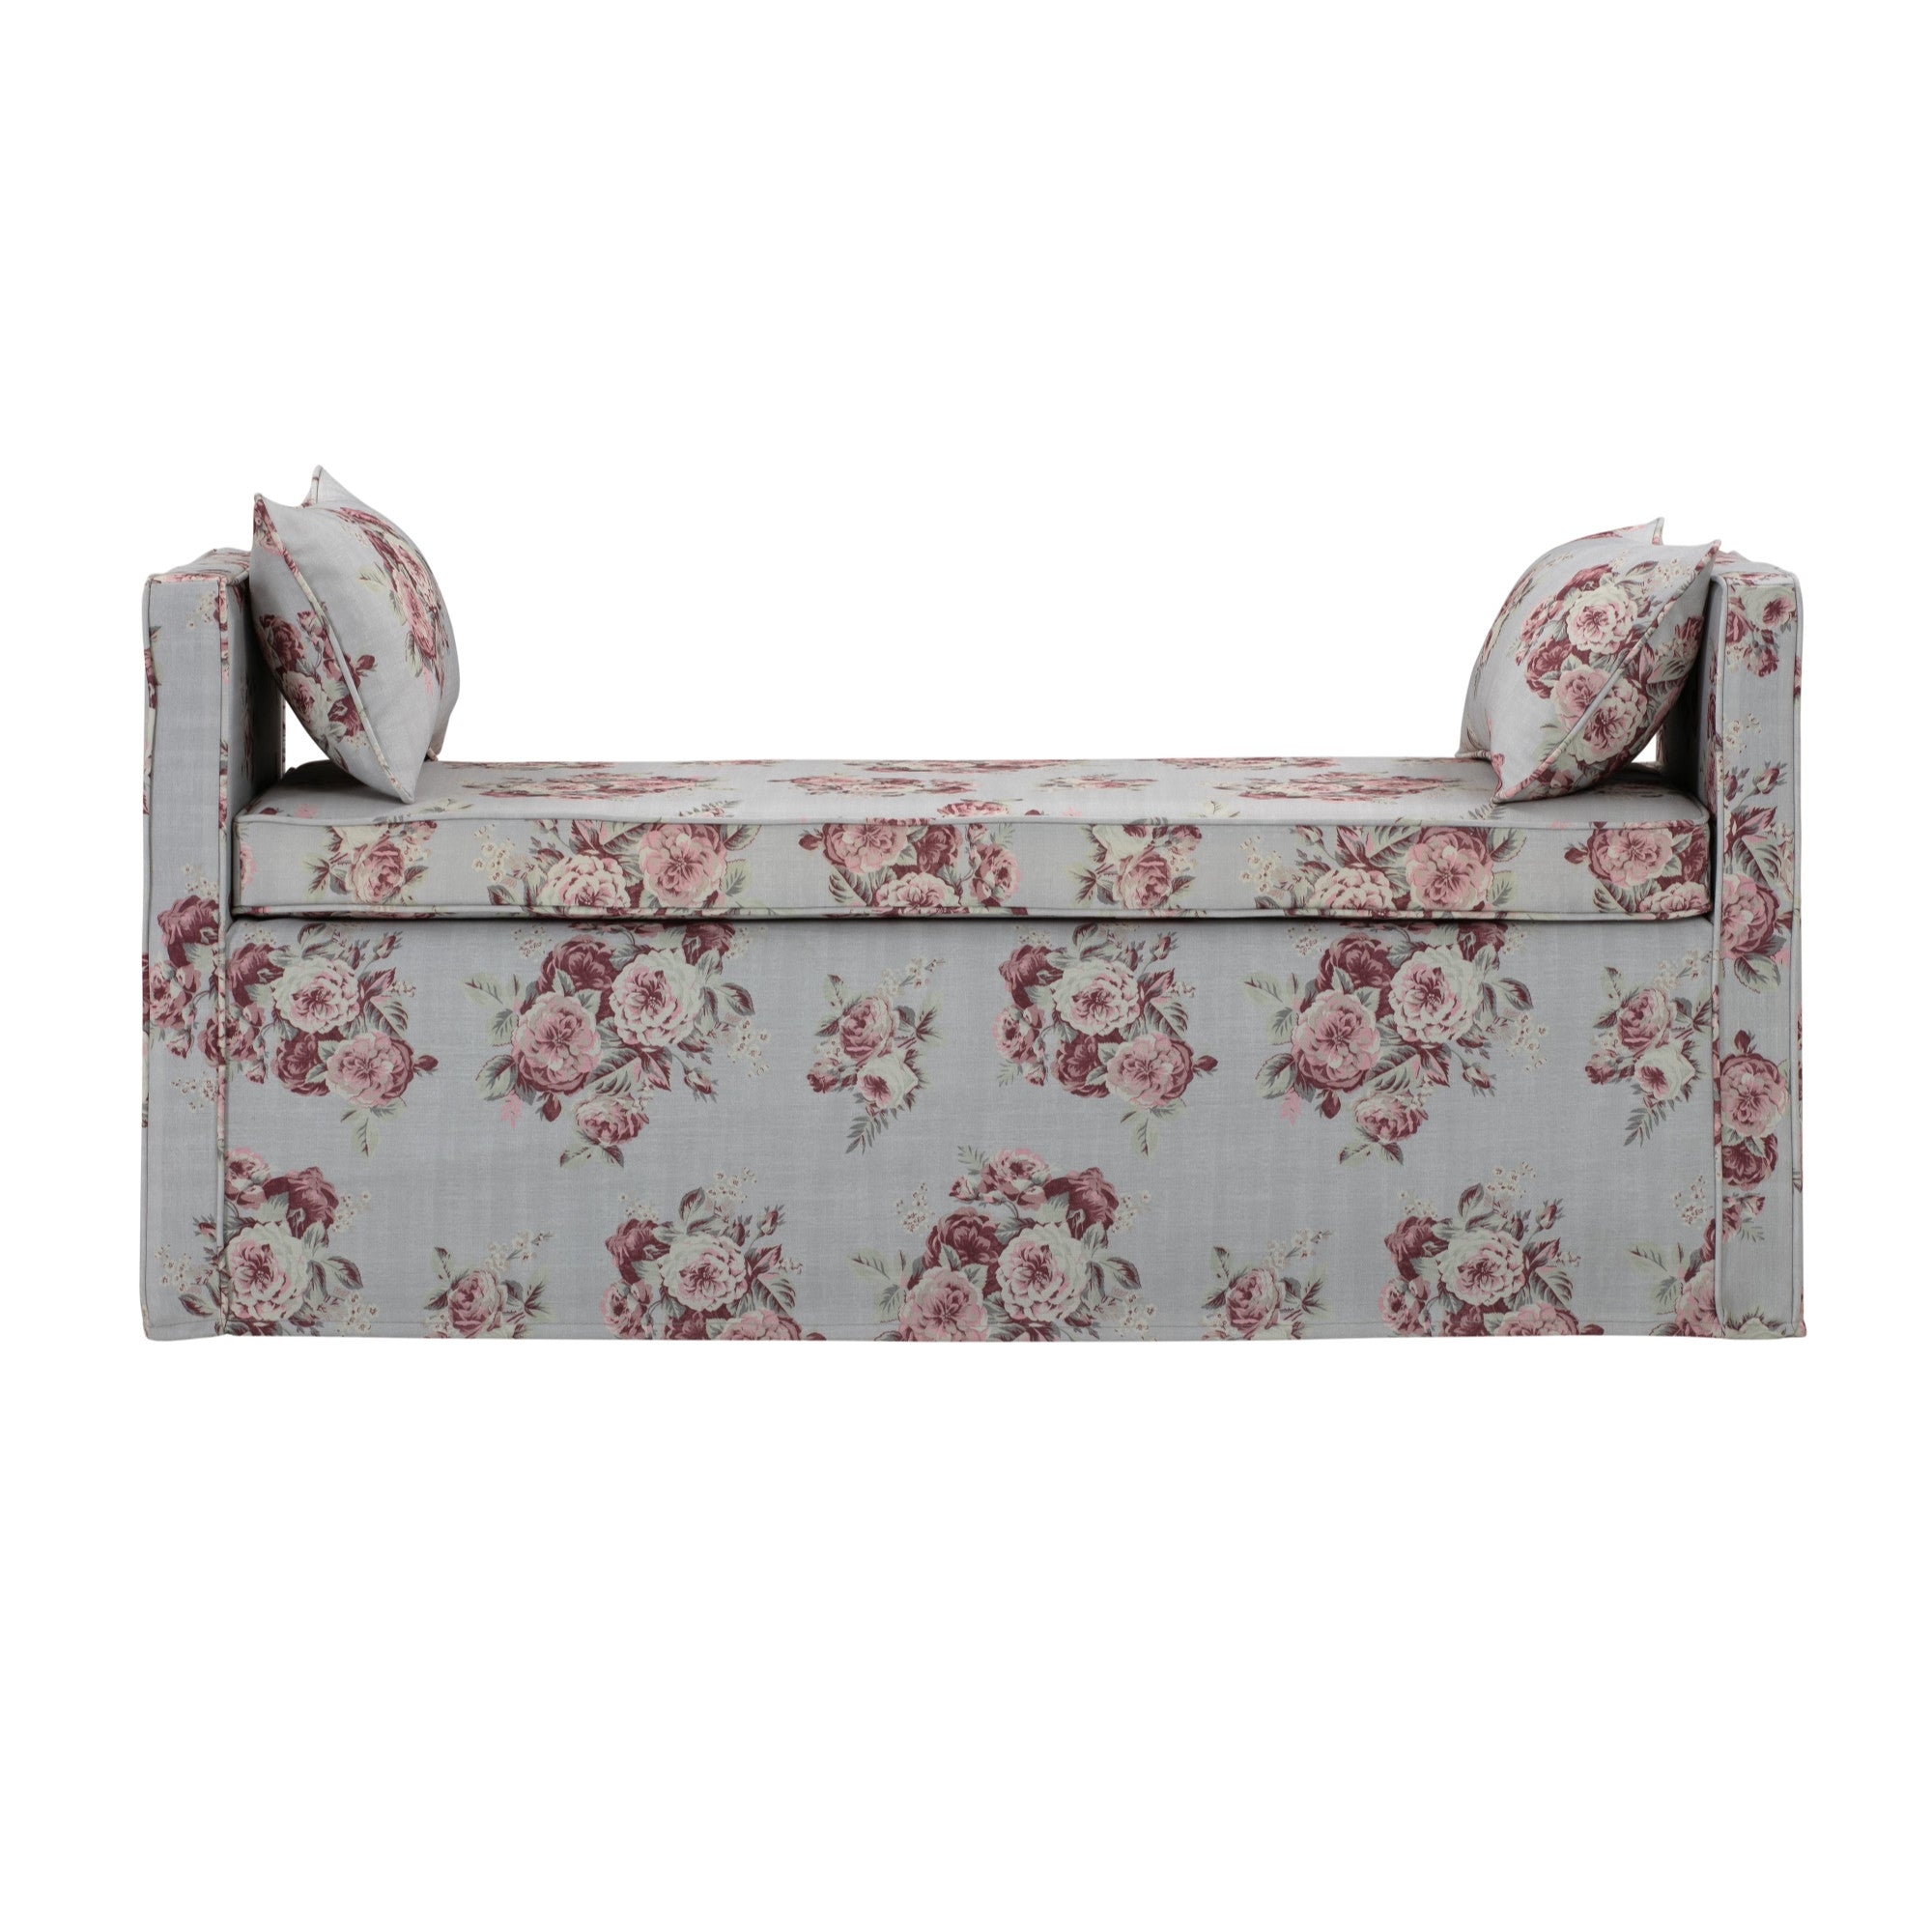 53" Light Gray And Black Upholstered Linen Floral Bench